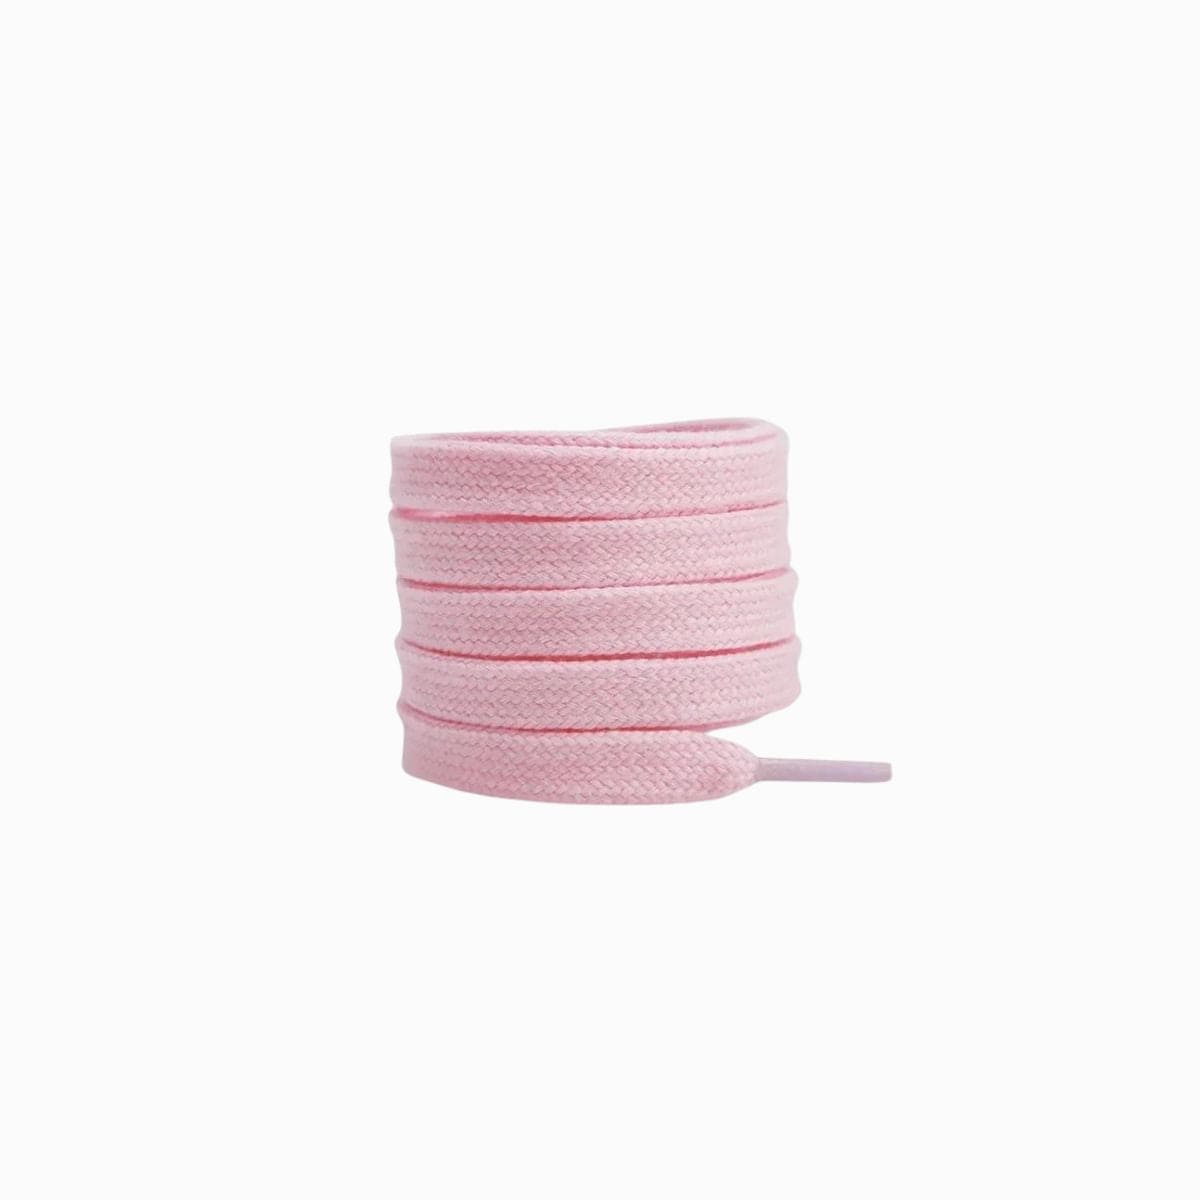 Light Pink Replacement Adidas Shoe Laces for Adidas Samba Black Sneakers by Kicks Shoelaces